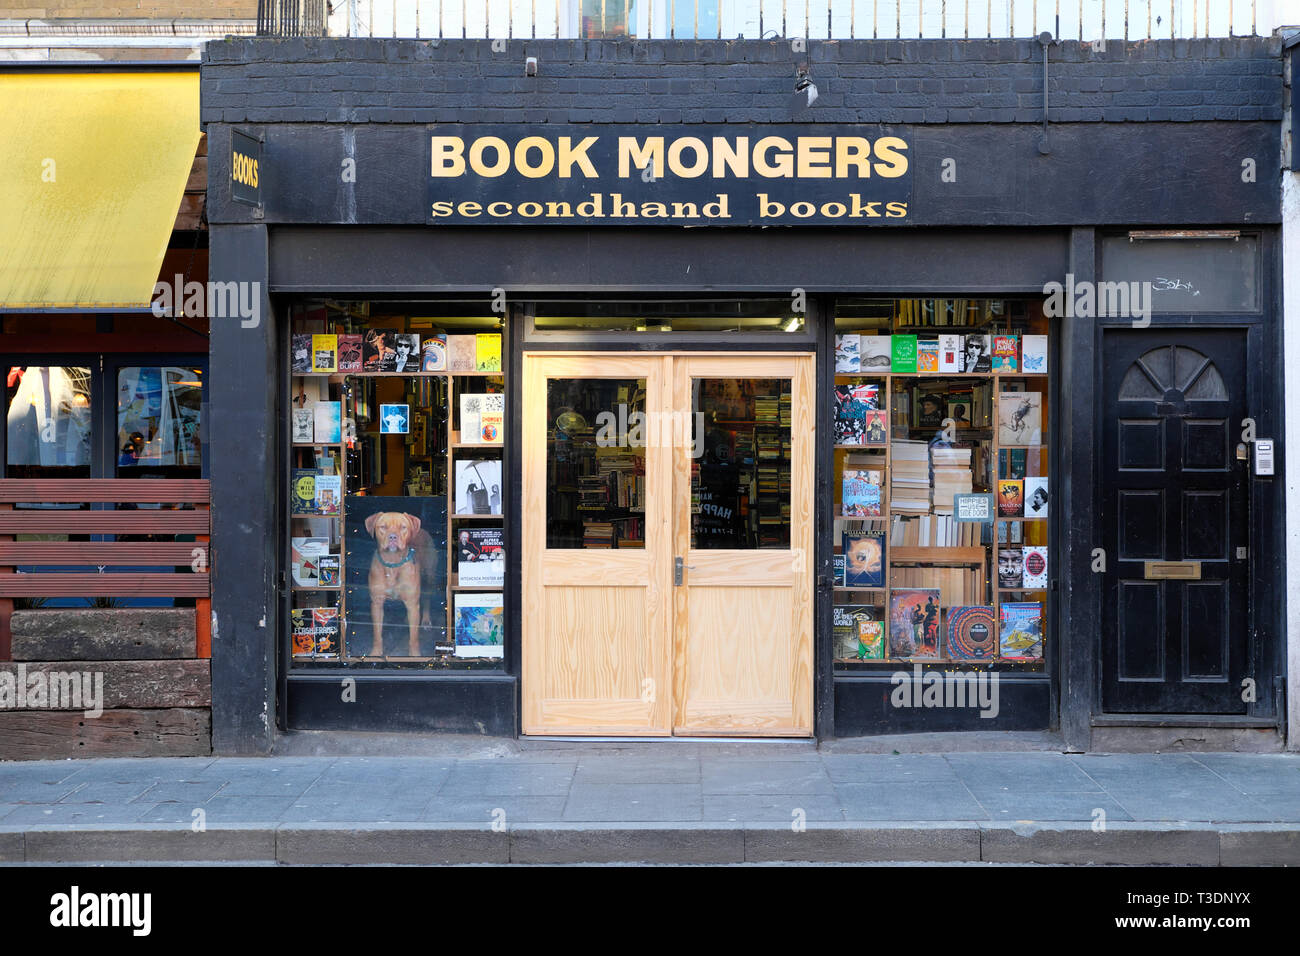 Book Mongers second hand books book shop window xterior facade on Coldharbour Lane in Brixton South London SW9 England UK   KATHY DEWITT Stock Photo